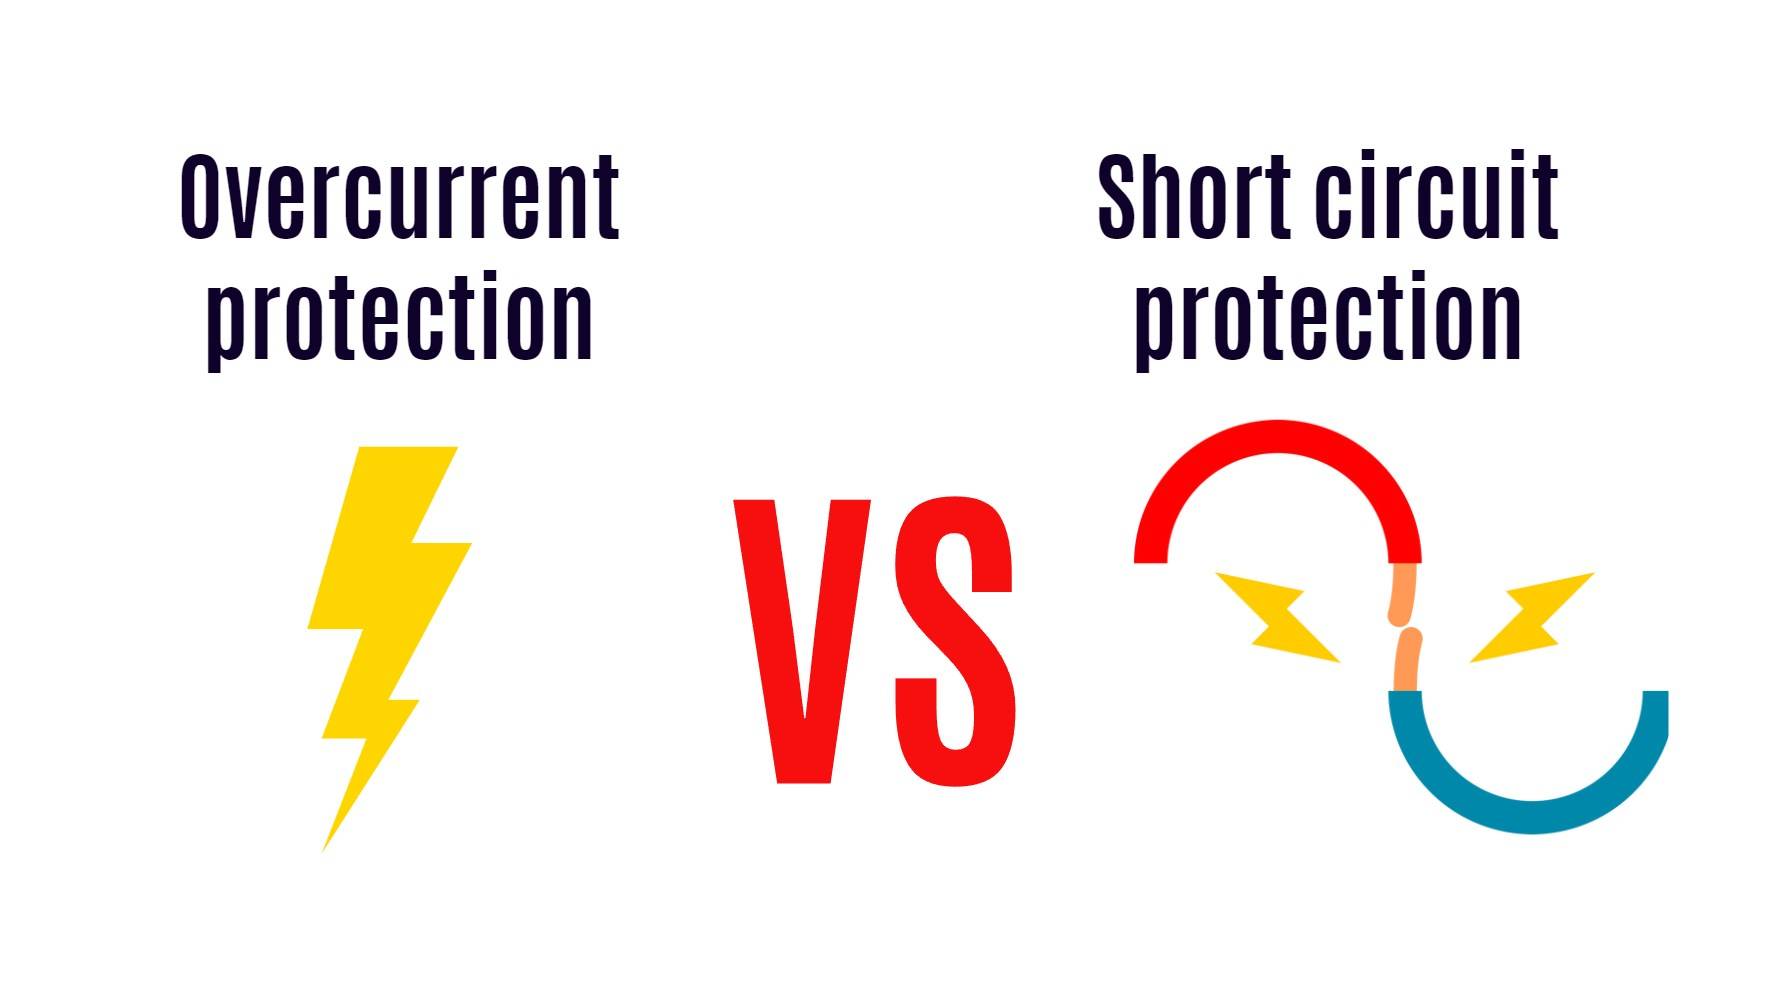 Overcurrent protection vs. Short circuit protection in Battery BMS